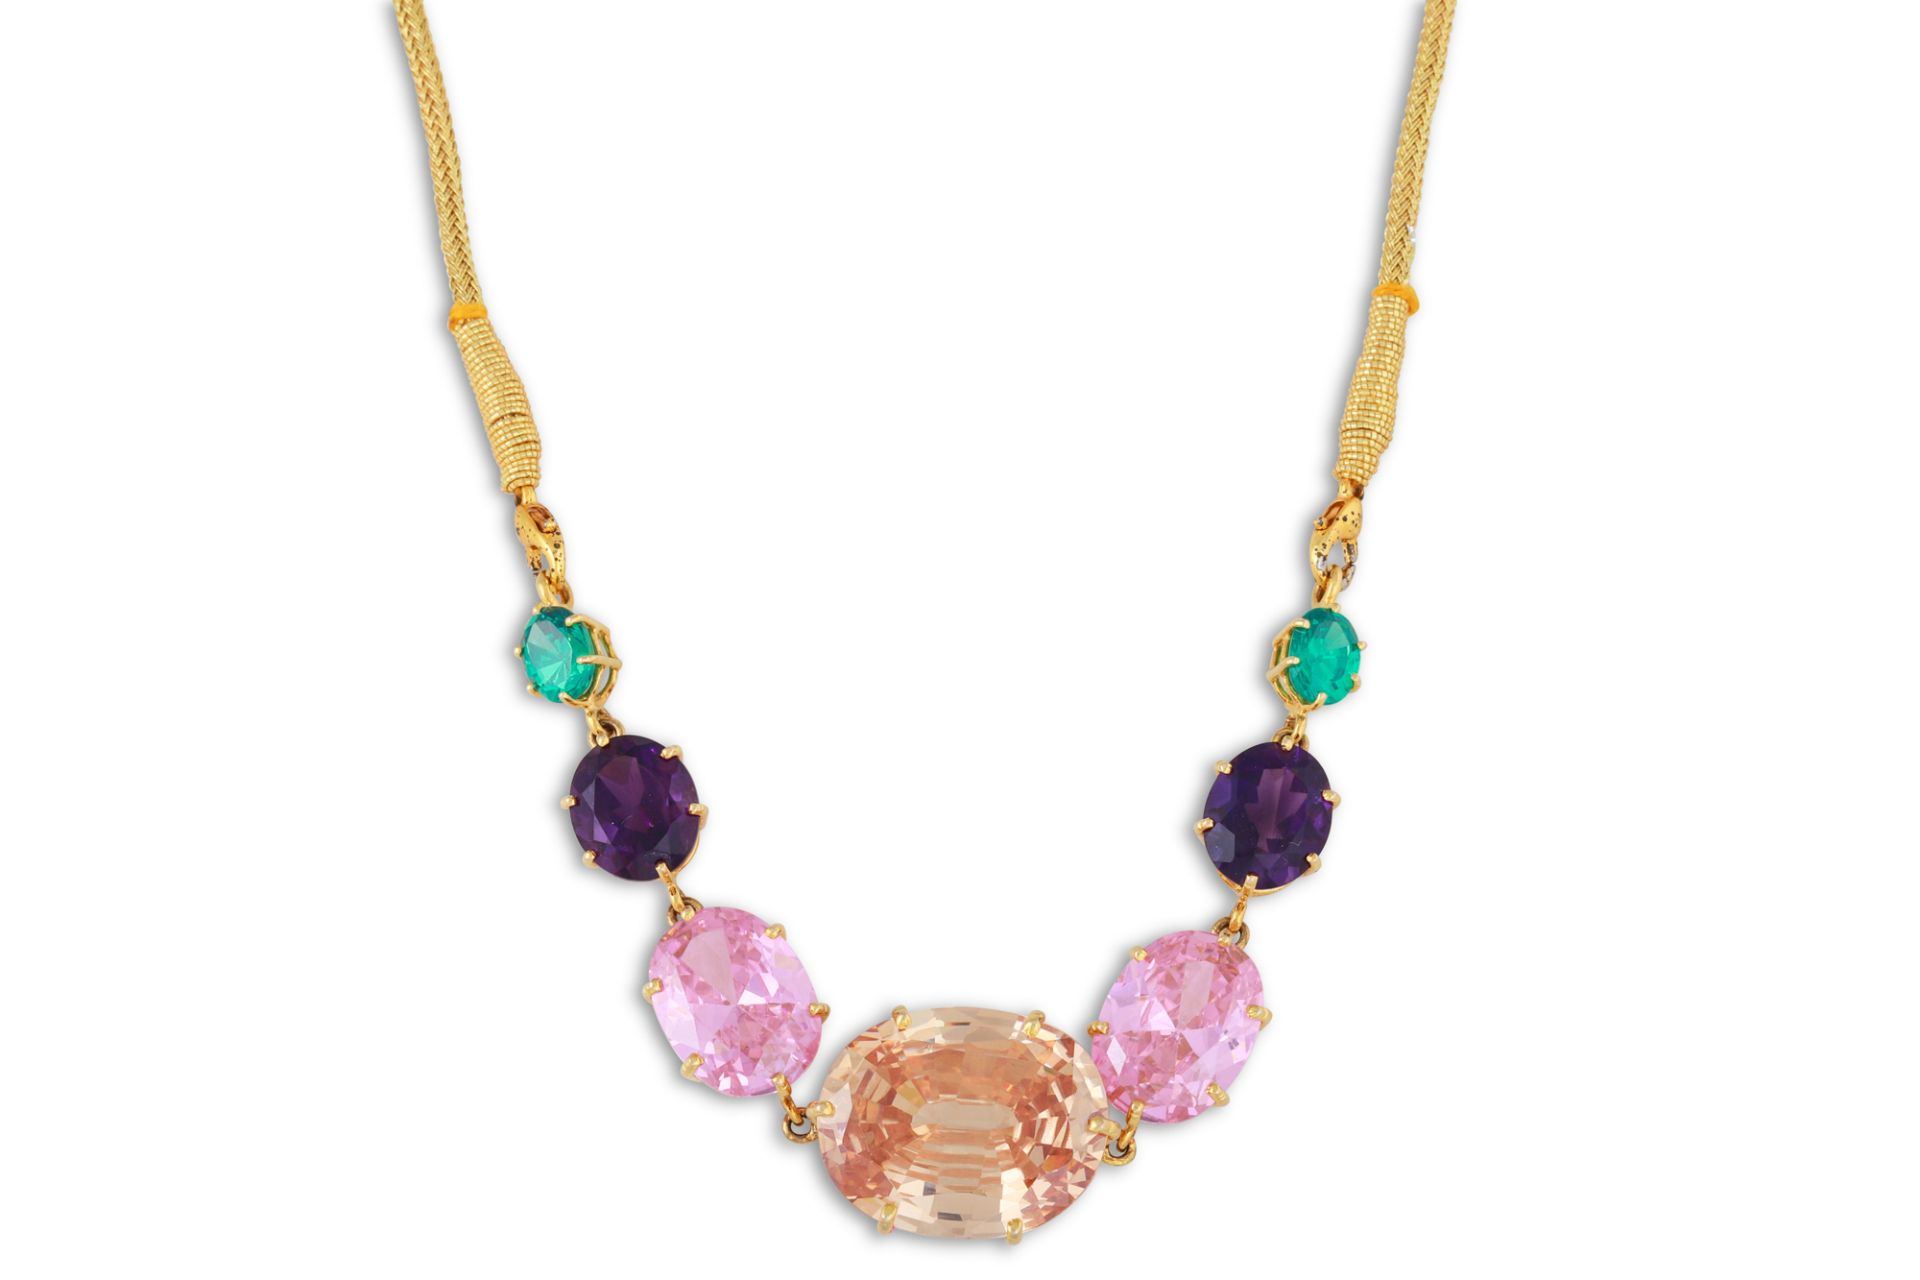 A MULTI GEM-SET NECKLACE, the stones set in 18ct gold, to a cord necklace